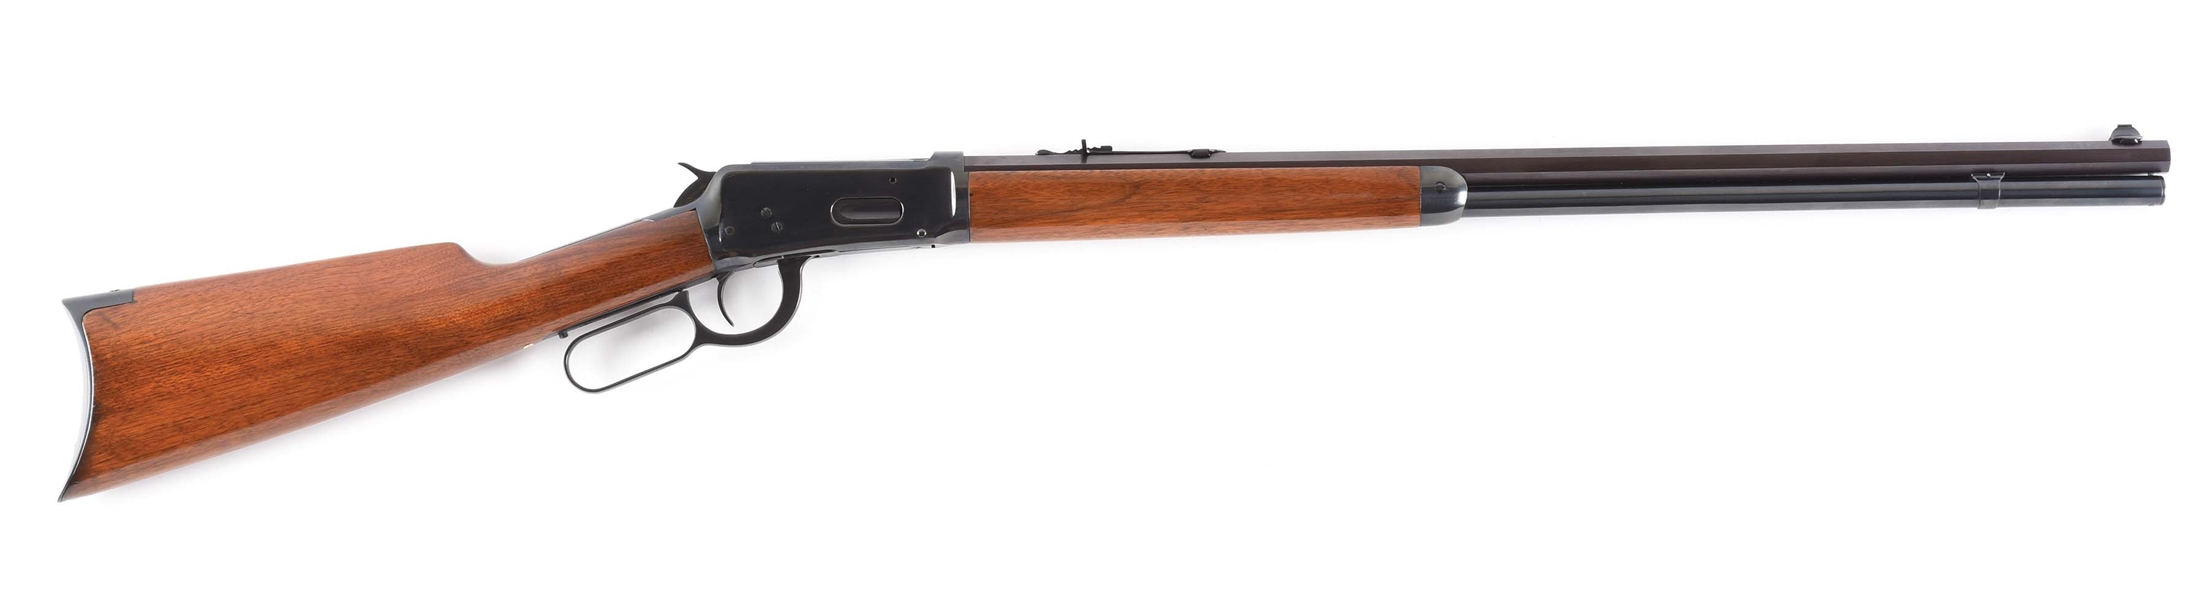 (C) WINCHESTER MODEL 1894 LEVER ACTION RIFLE (1915).